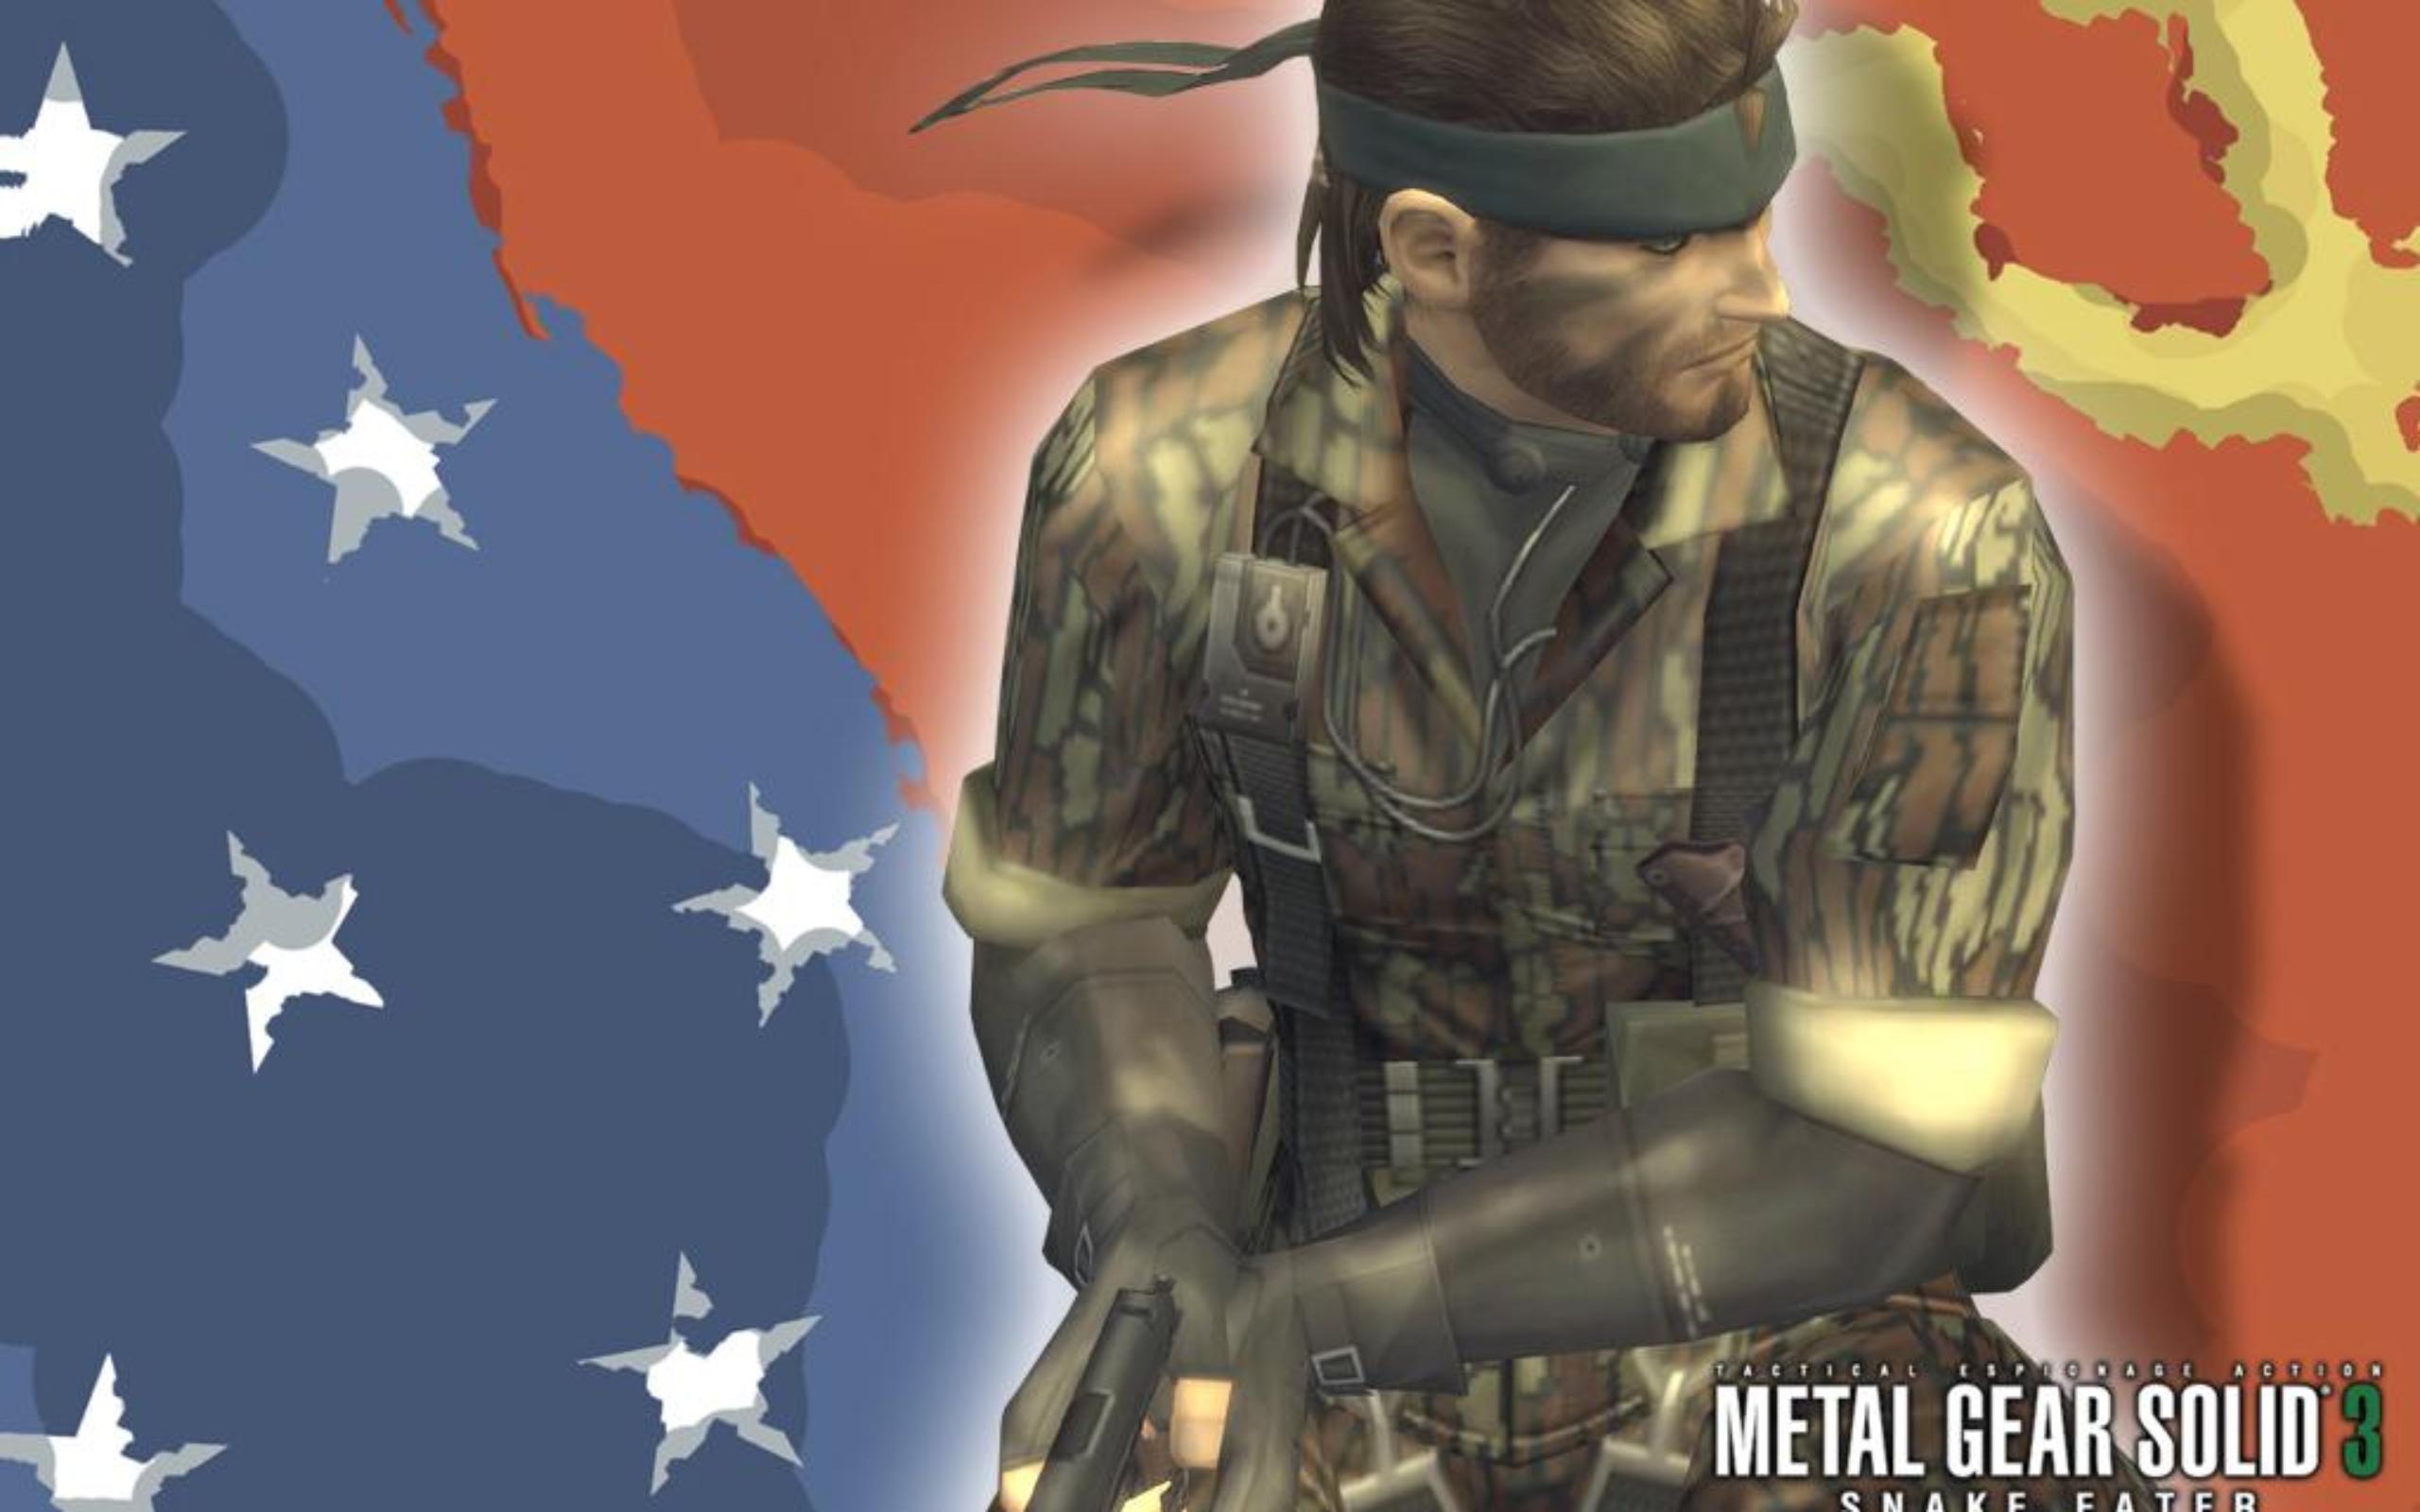 Video Game Metal Gear Solid 3: Snake Eater HD Wallpaper | Background Image